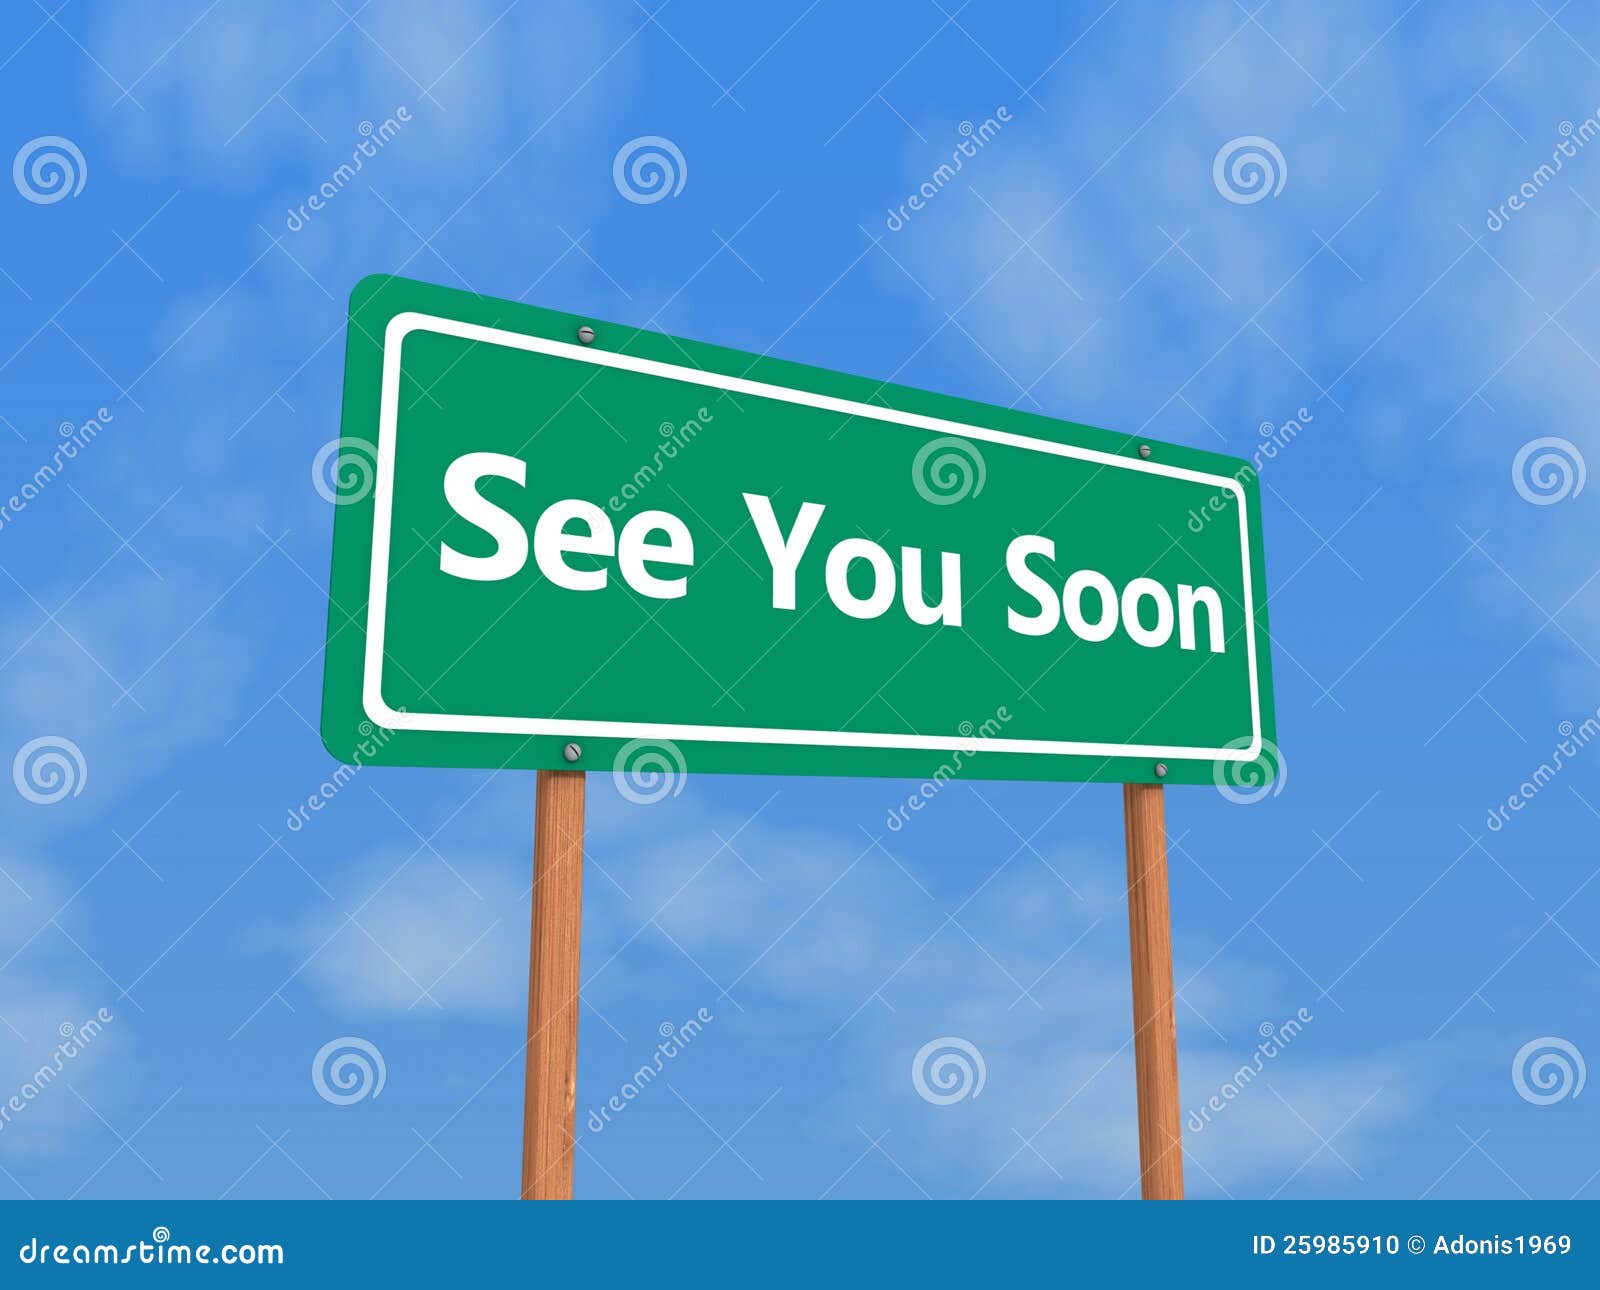 clipart see you soon - photo #12